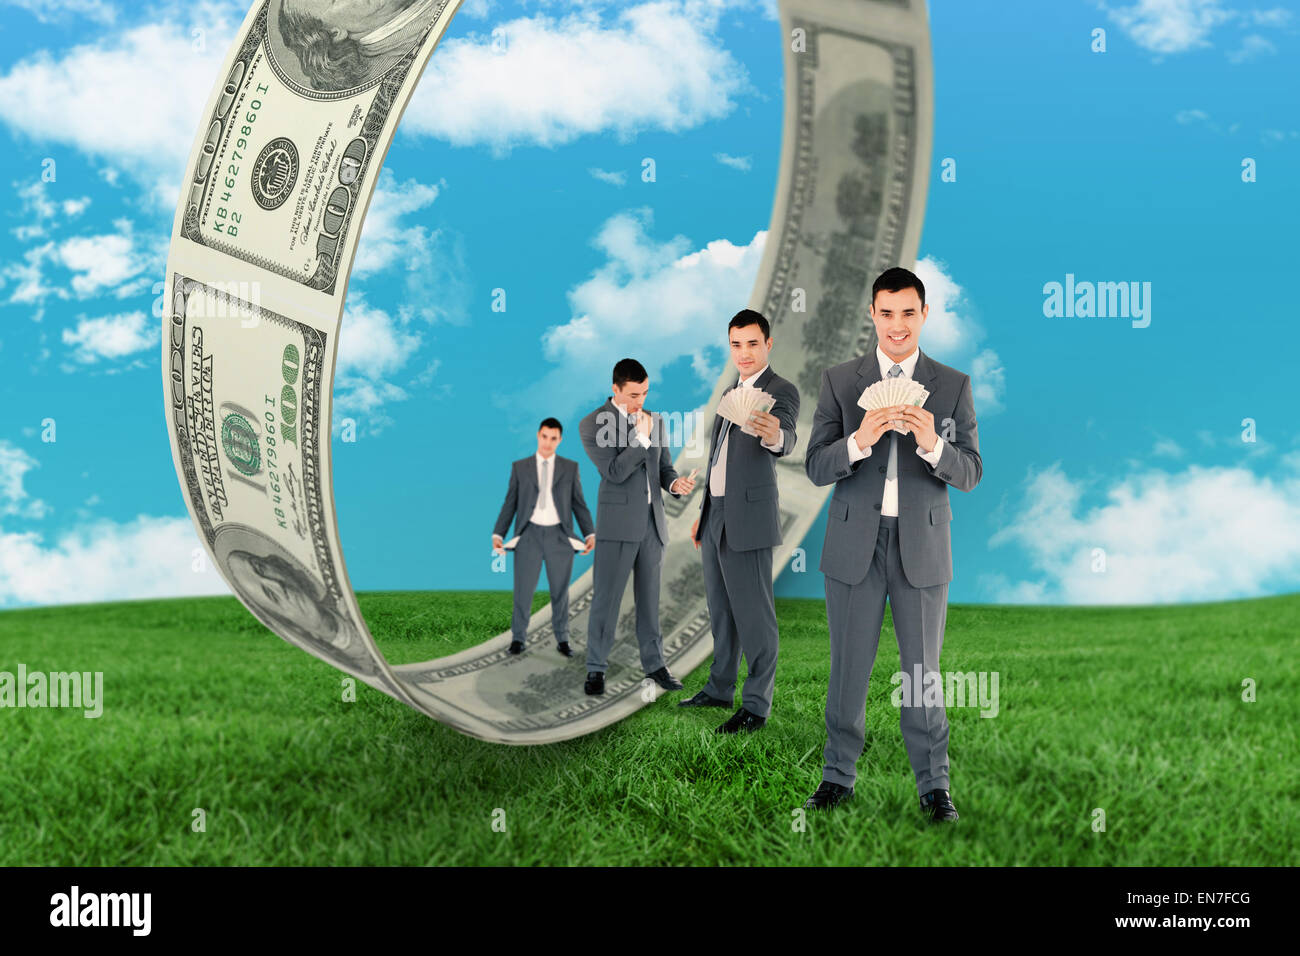 Composite image of multiple image of wealthy businessman Stock Photo